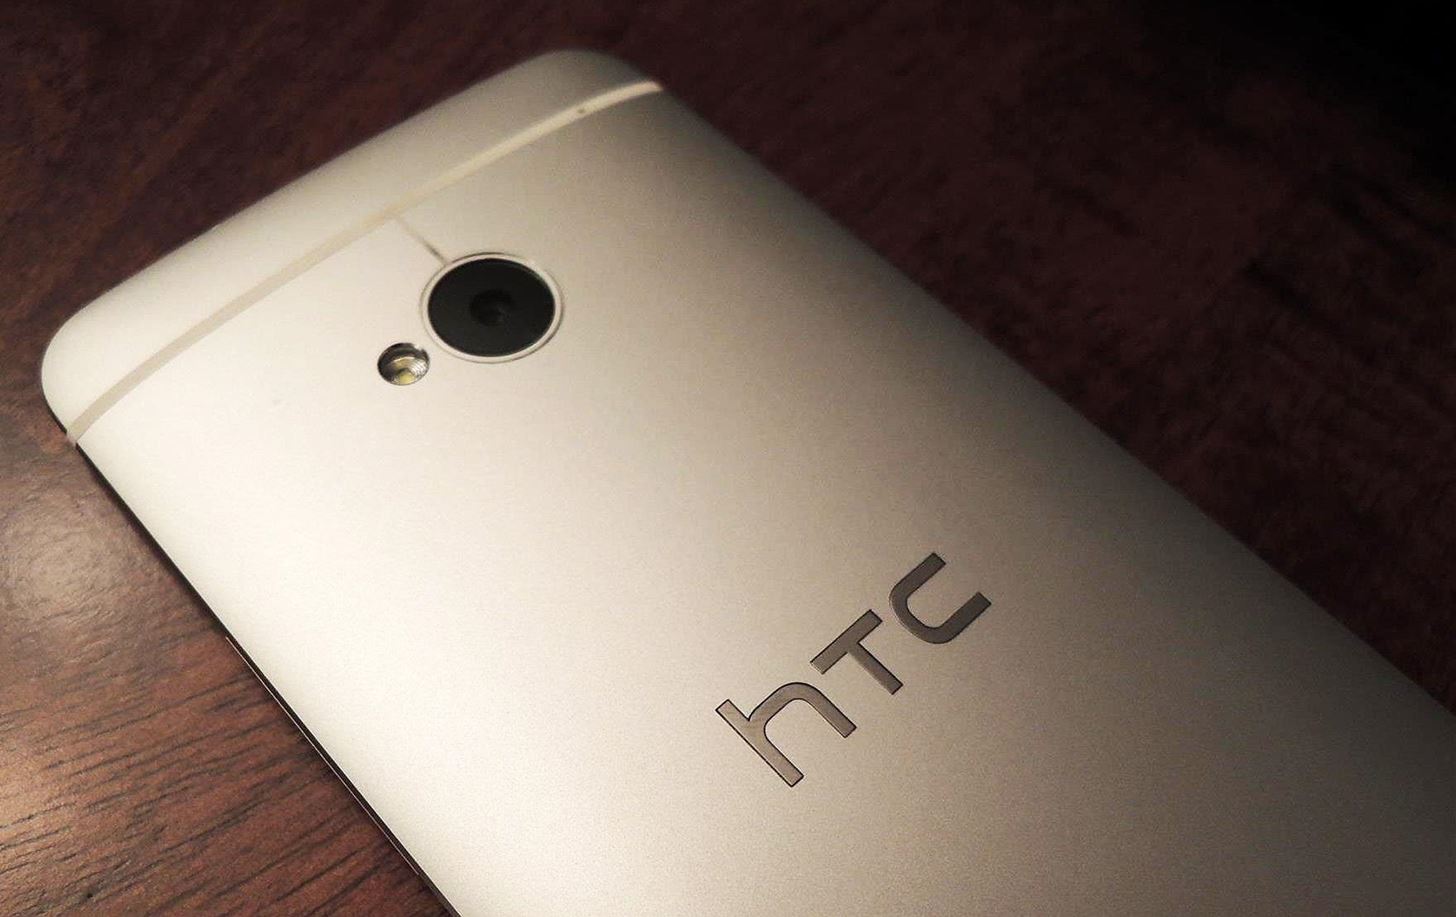 What Every HTC One Owner Should Know About the UltraPixel Camera to Never Miss a Shot